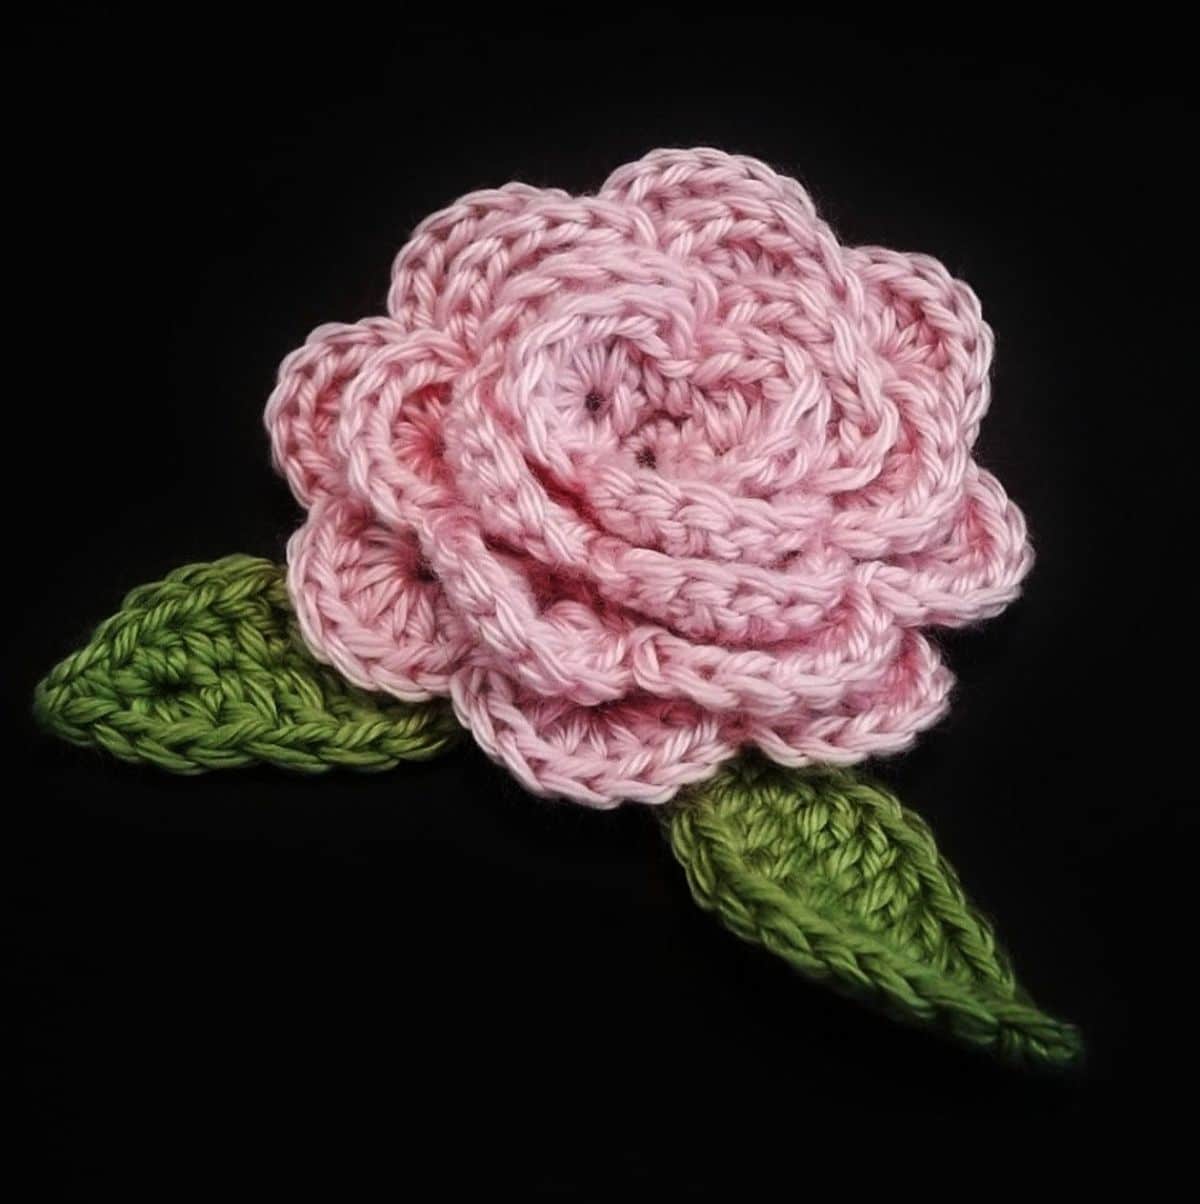 A light pink crochet rose with two green leaves either side on a black background.